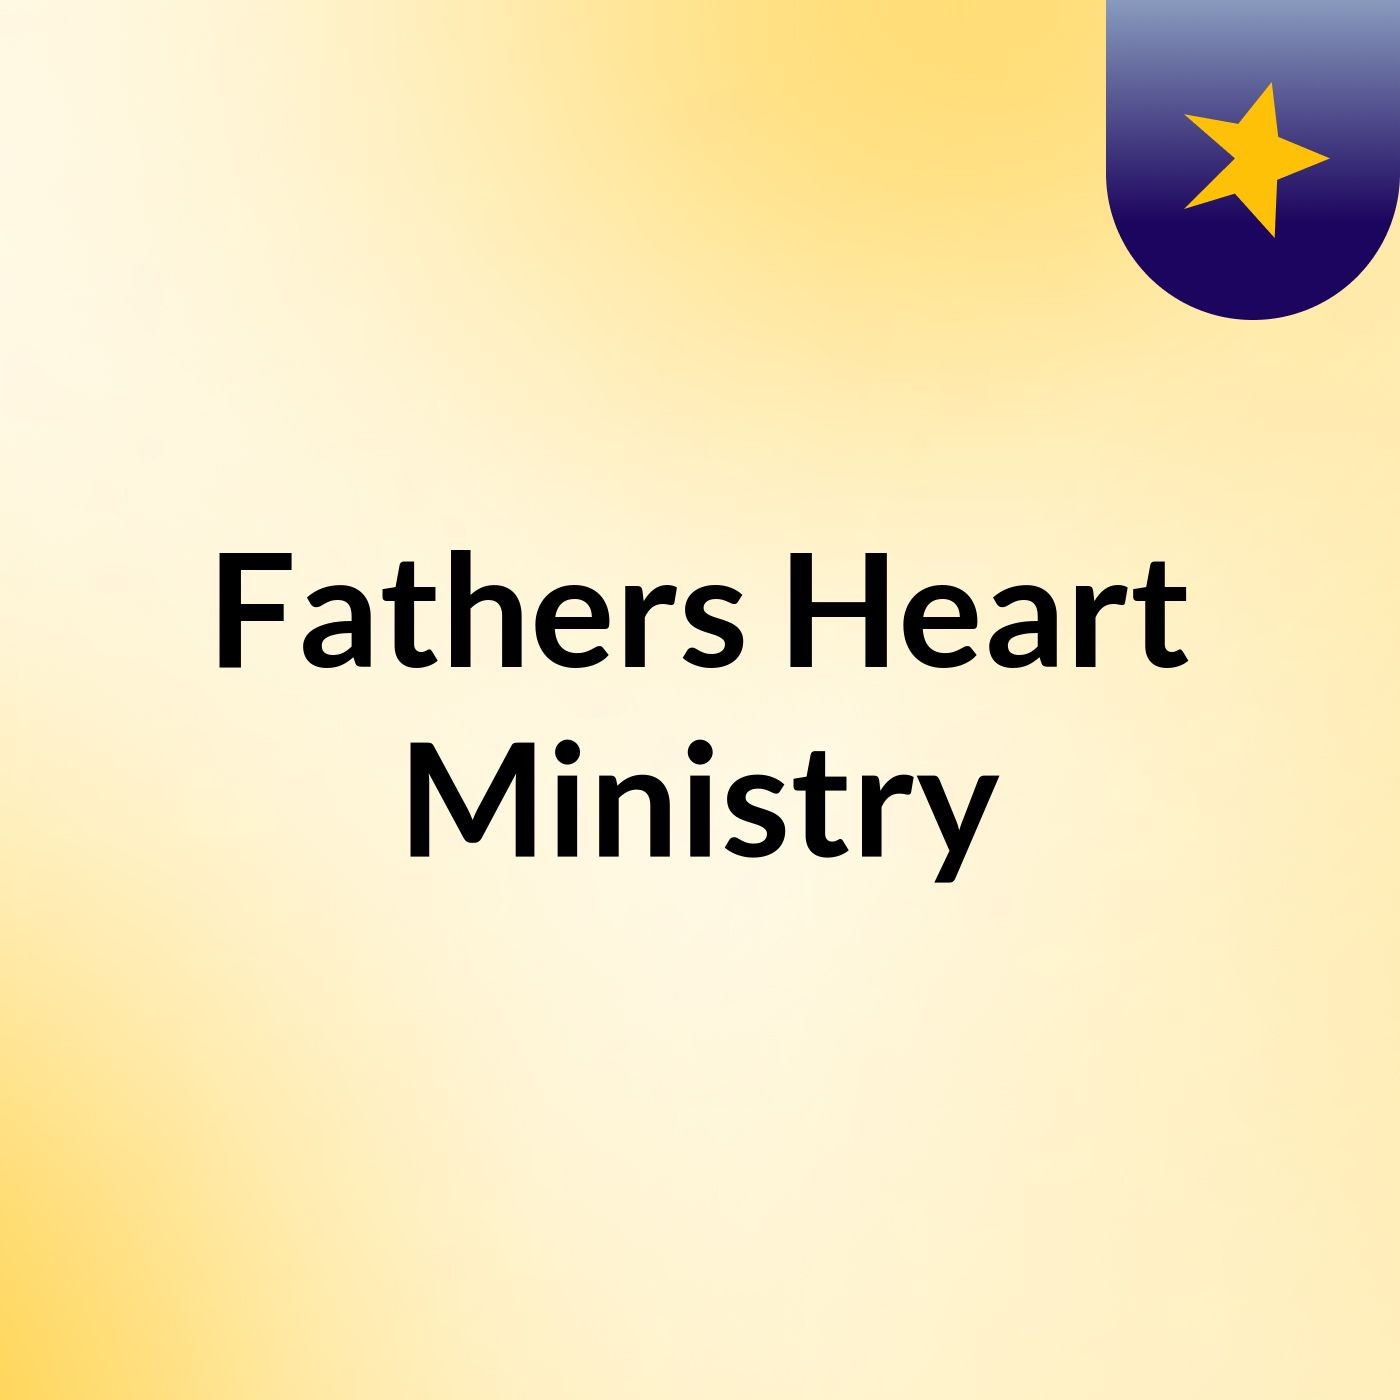 Fathers Heart Ministry